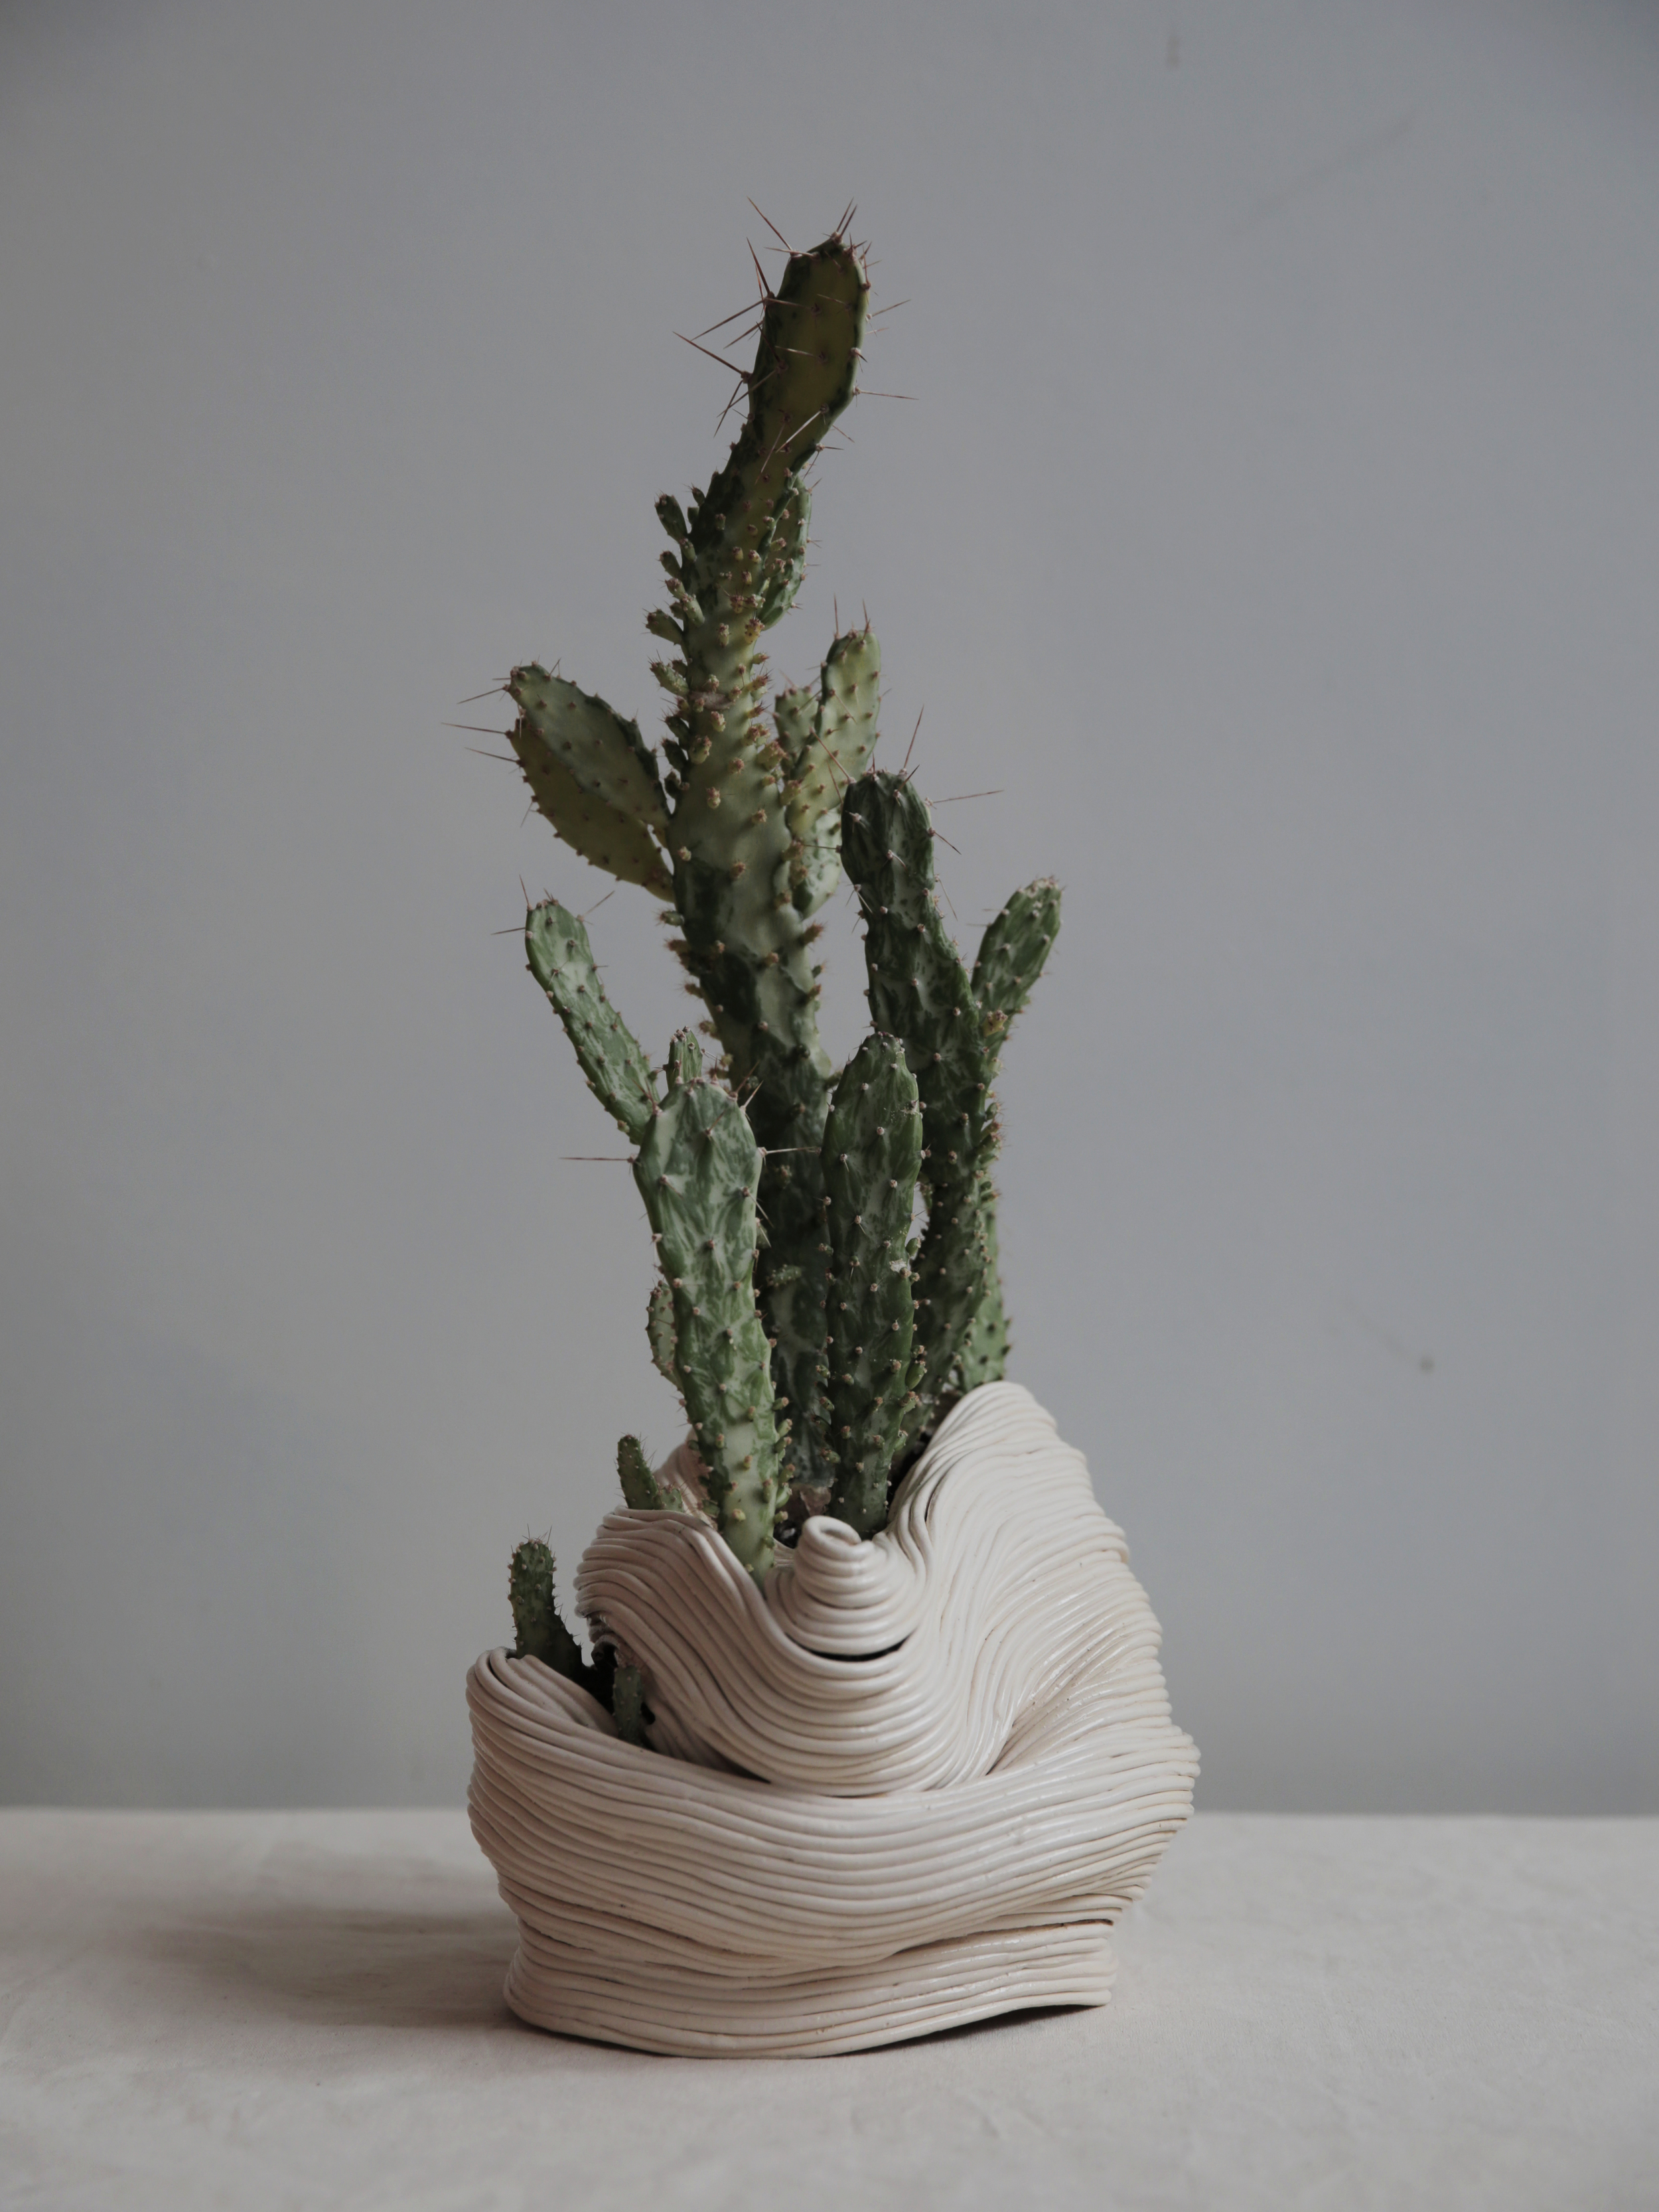   Seated vessel leaning forward, &nbsp;2016.  Ceramic with Opuntia Monacantha variegata 